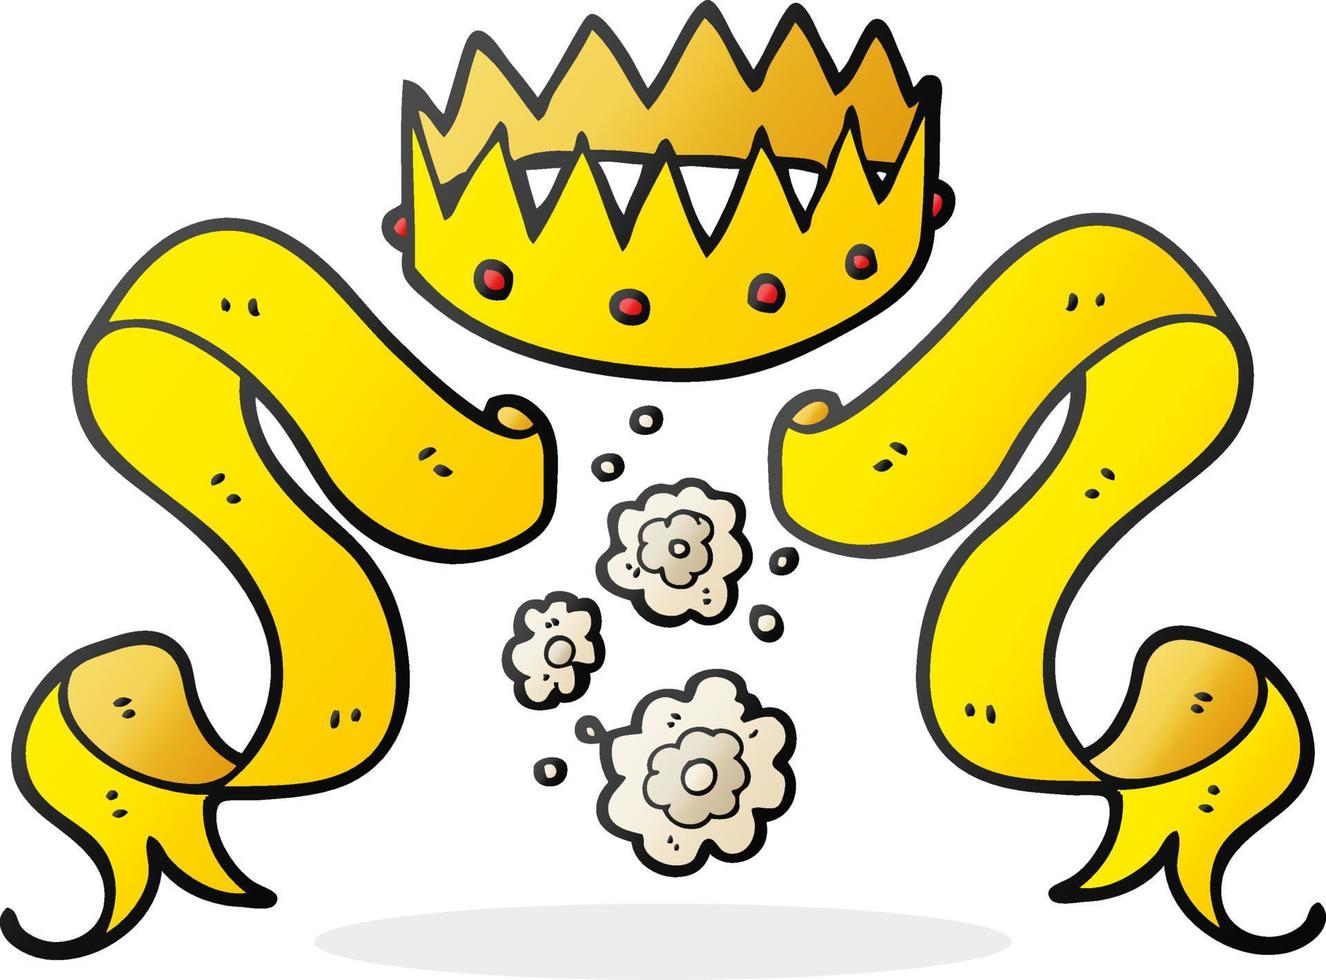 freehand drawn cartoon crown and scroll vector